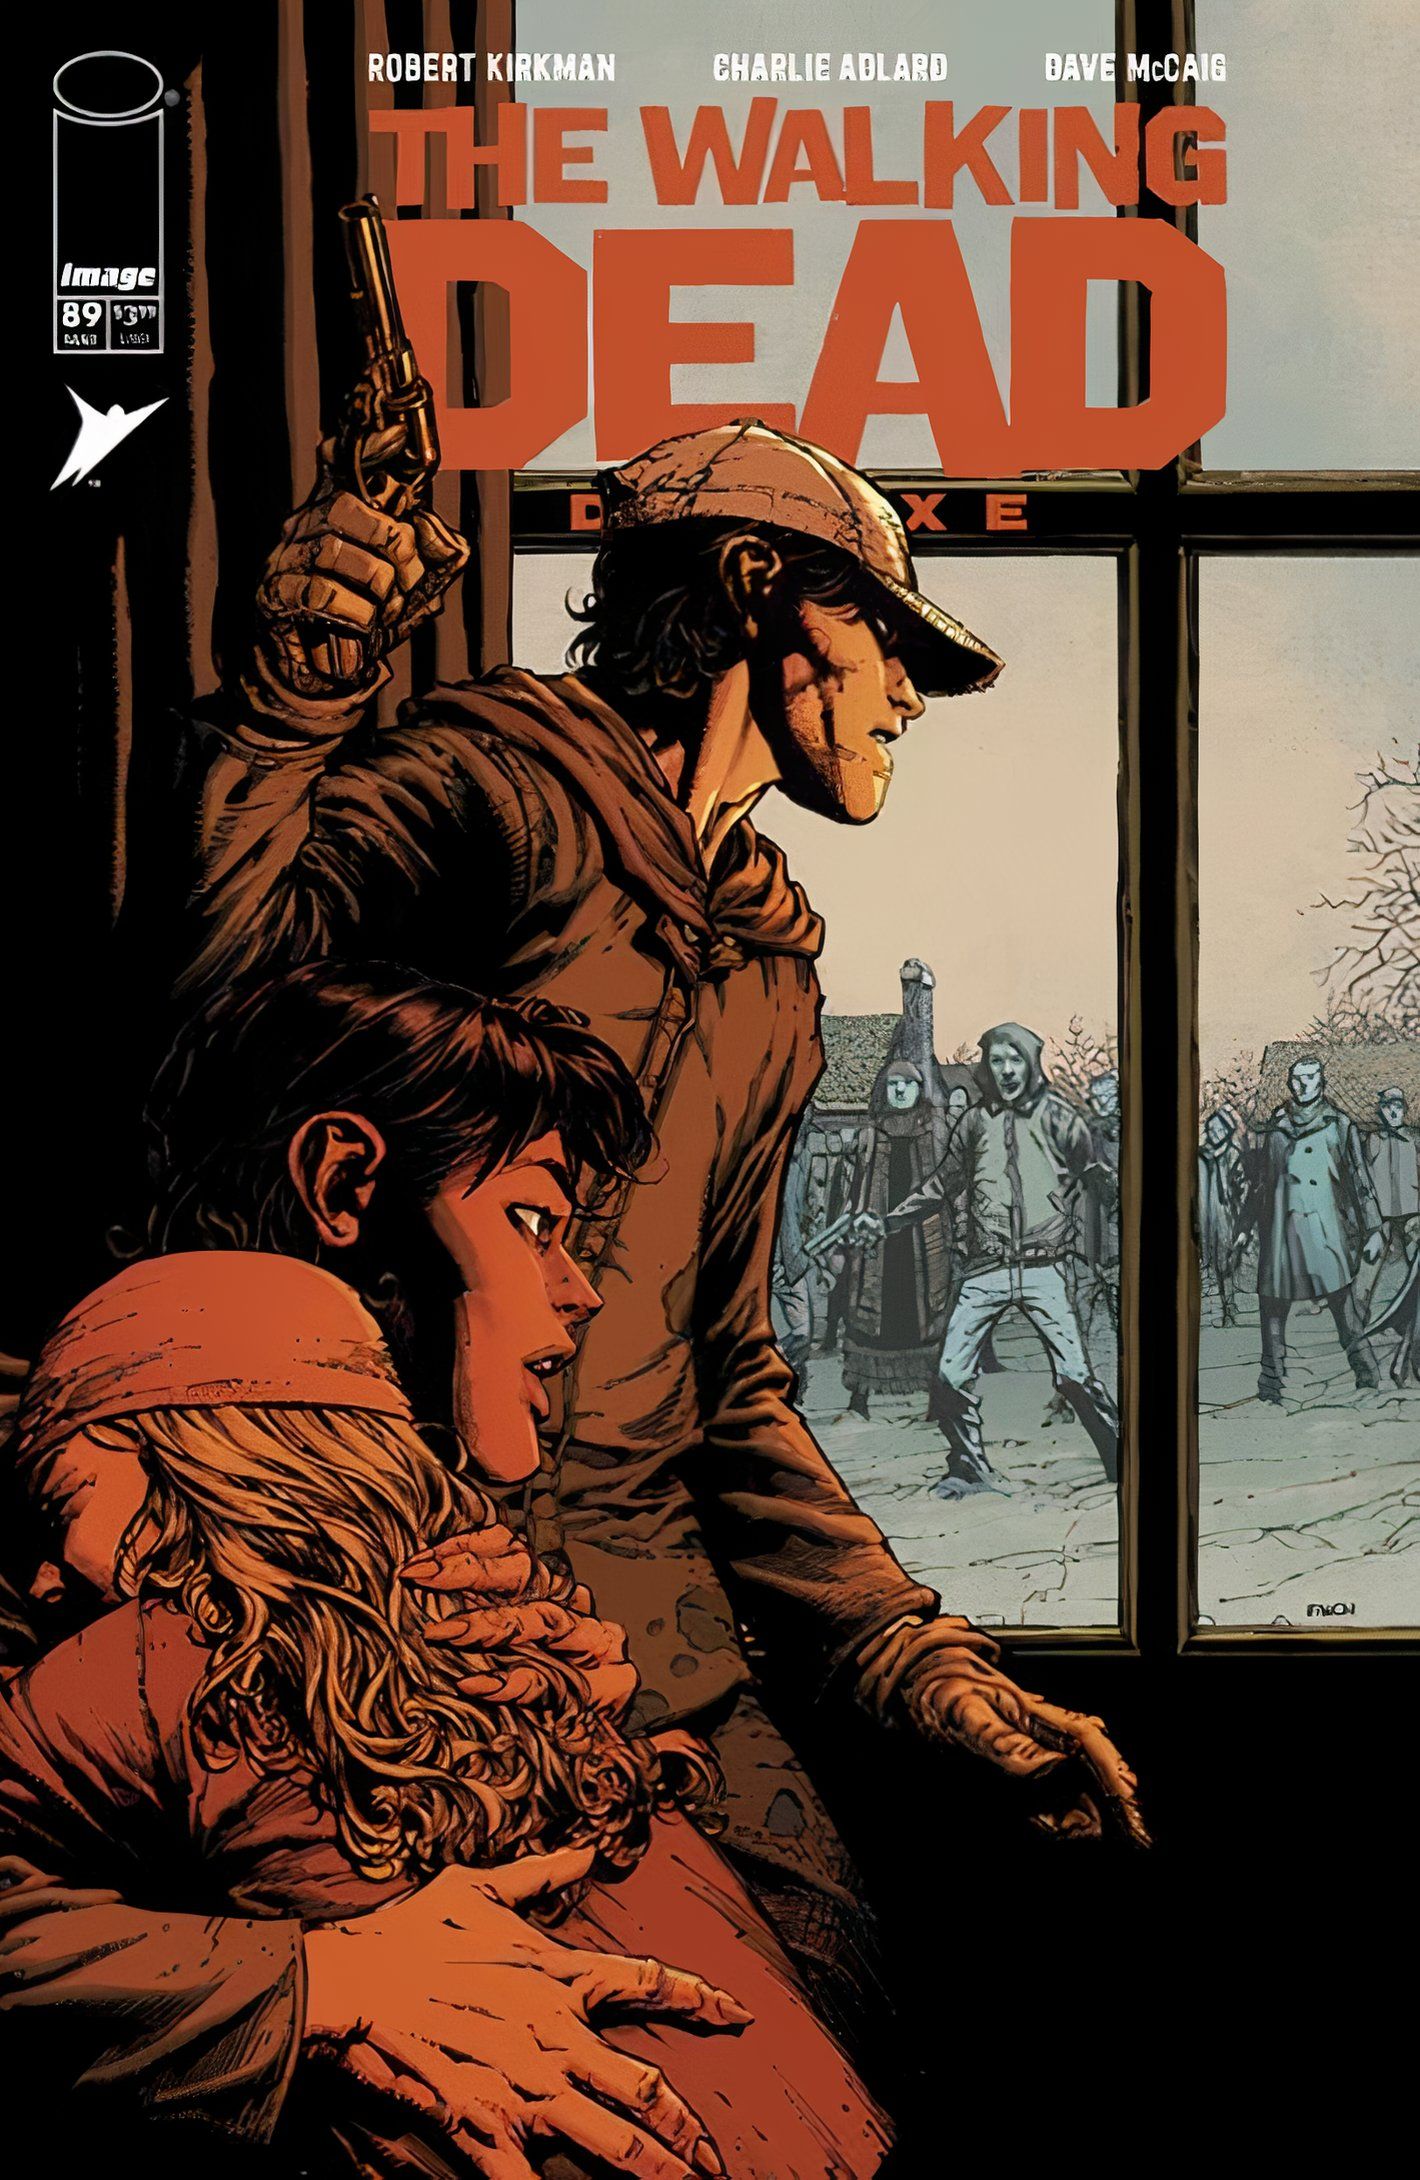 Walking Dead Deluxe #89, Glenn holds a gun, protecting other survivors; horde of zombies approach outside window.